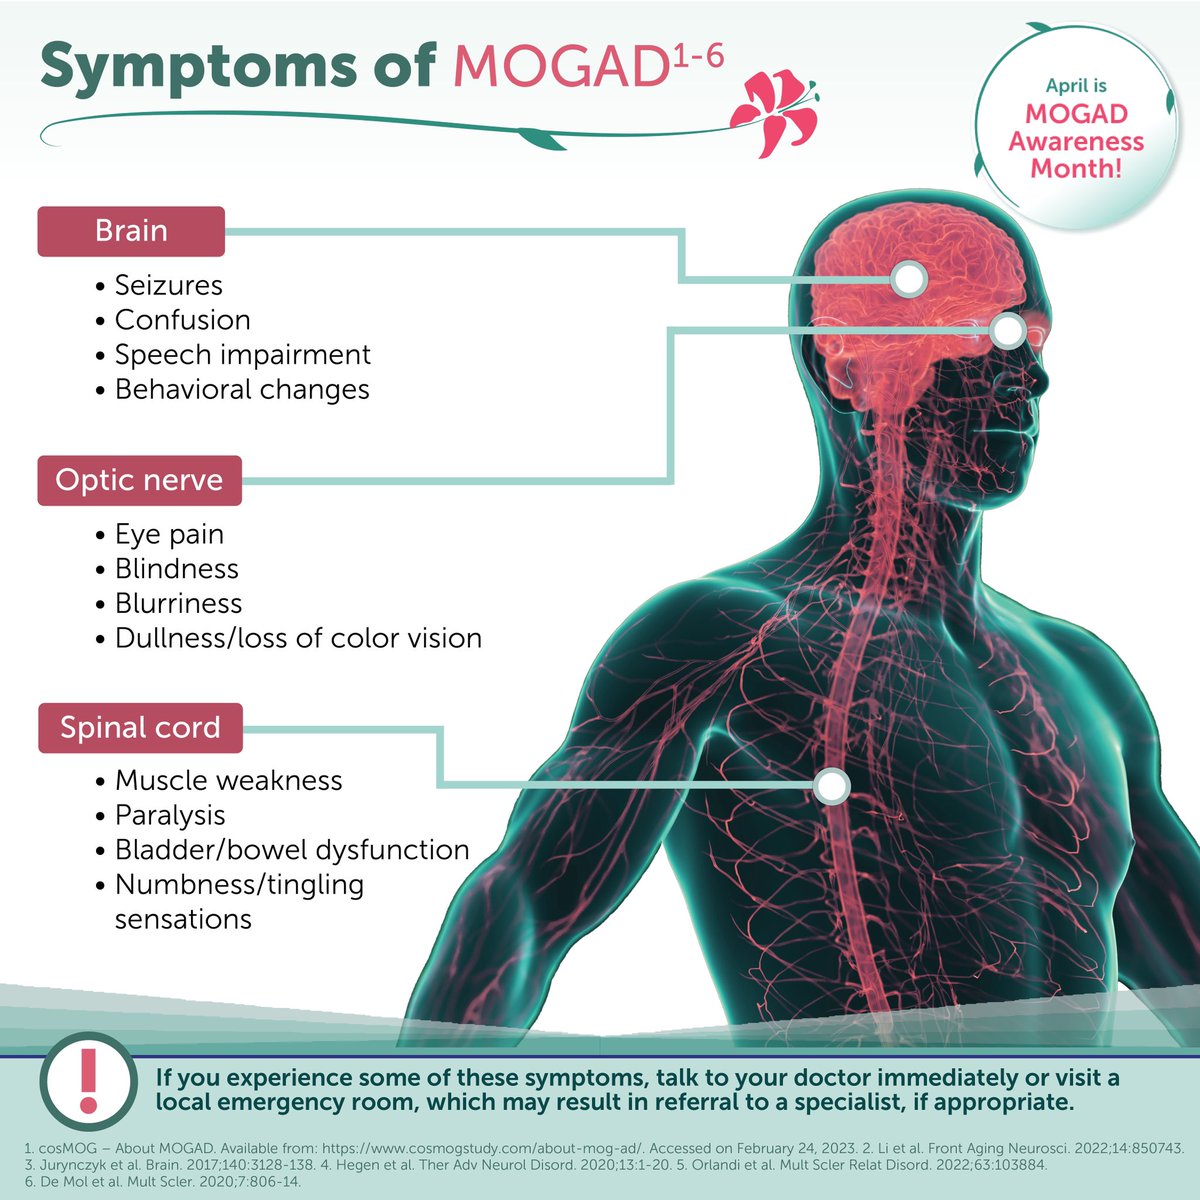 April is MOGAD Awareness Month! #mogadawarenessmonth #MOGAD #raredisease   MOGAD is a rare autoimmune disease with 1.6-4.8 per million adults diagnosed yearly. It is characterized by inflammation of the central nervous system – the optic nerve, brain, and/or spinal cord – with